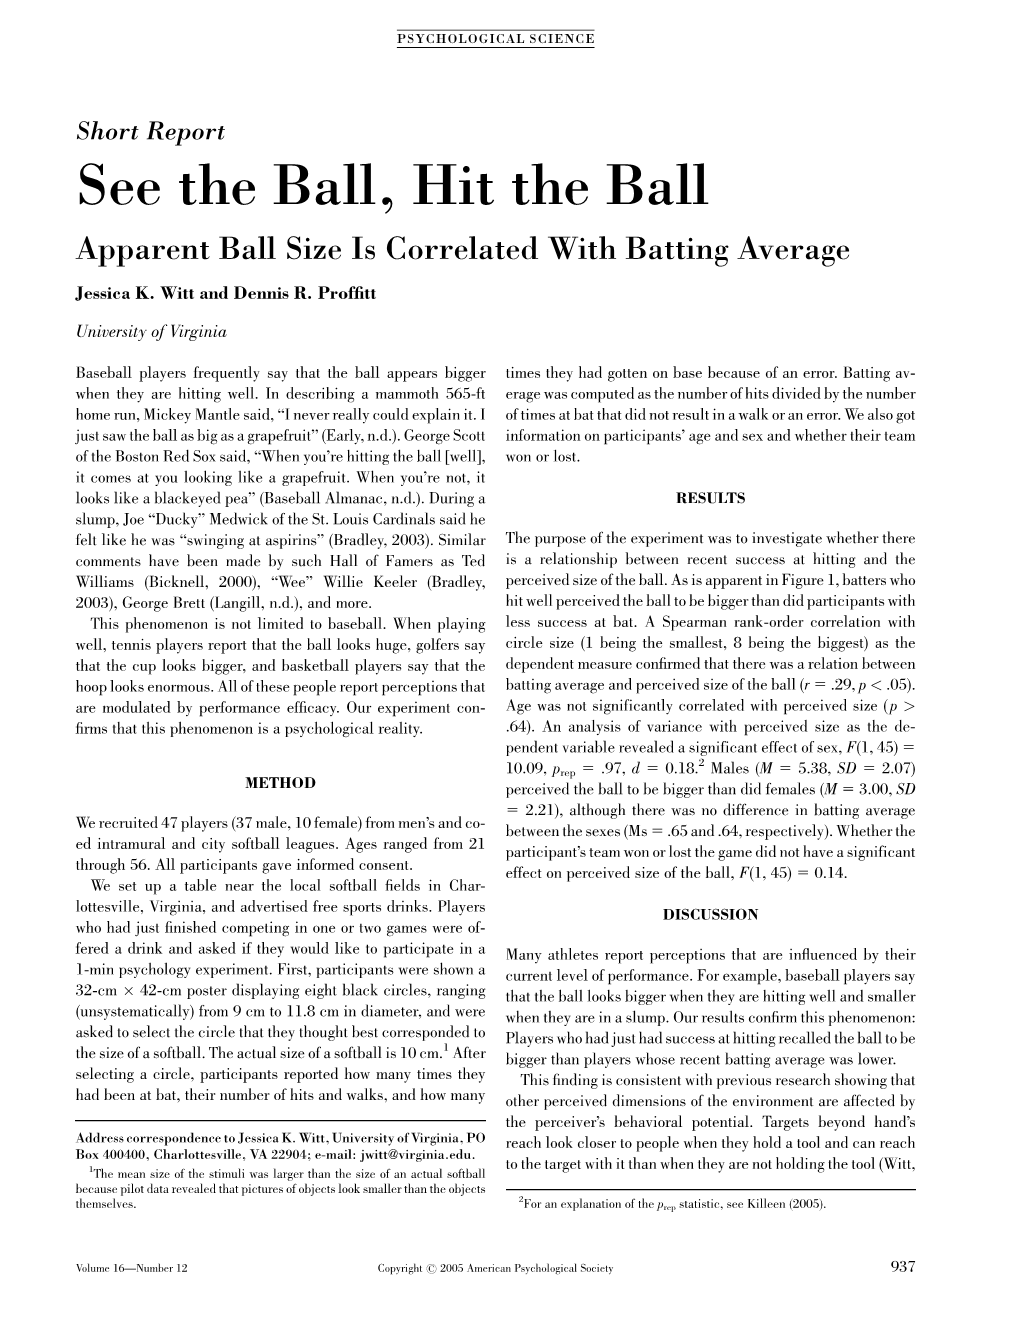 See the Ball, Hit the Ball Apparent Ball Size Is Correlated with Batting Average Jessica K